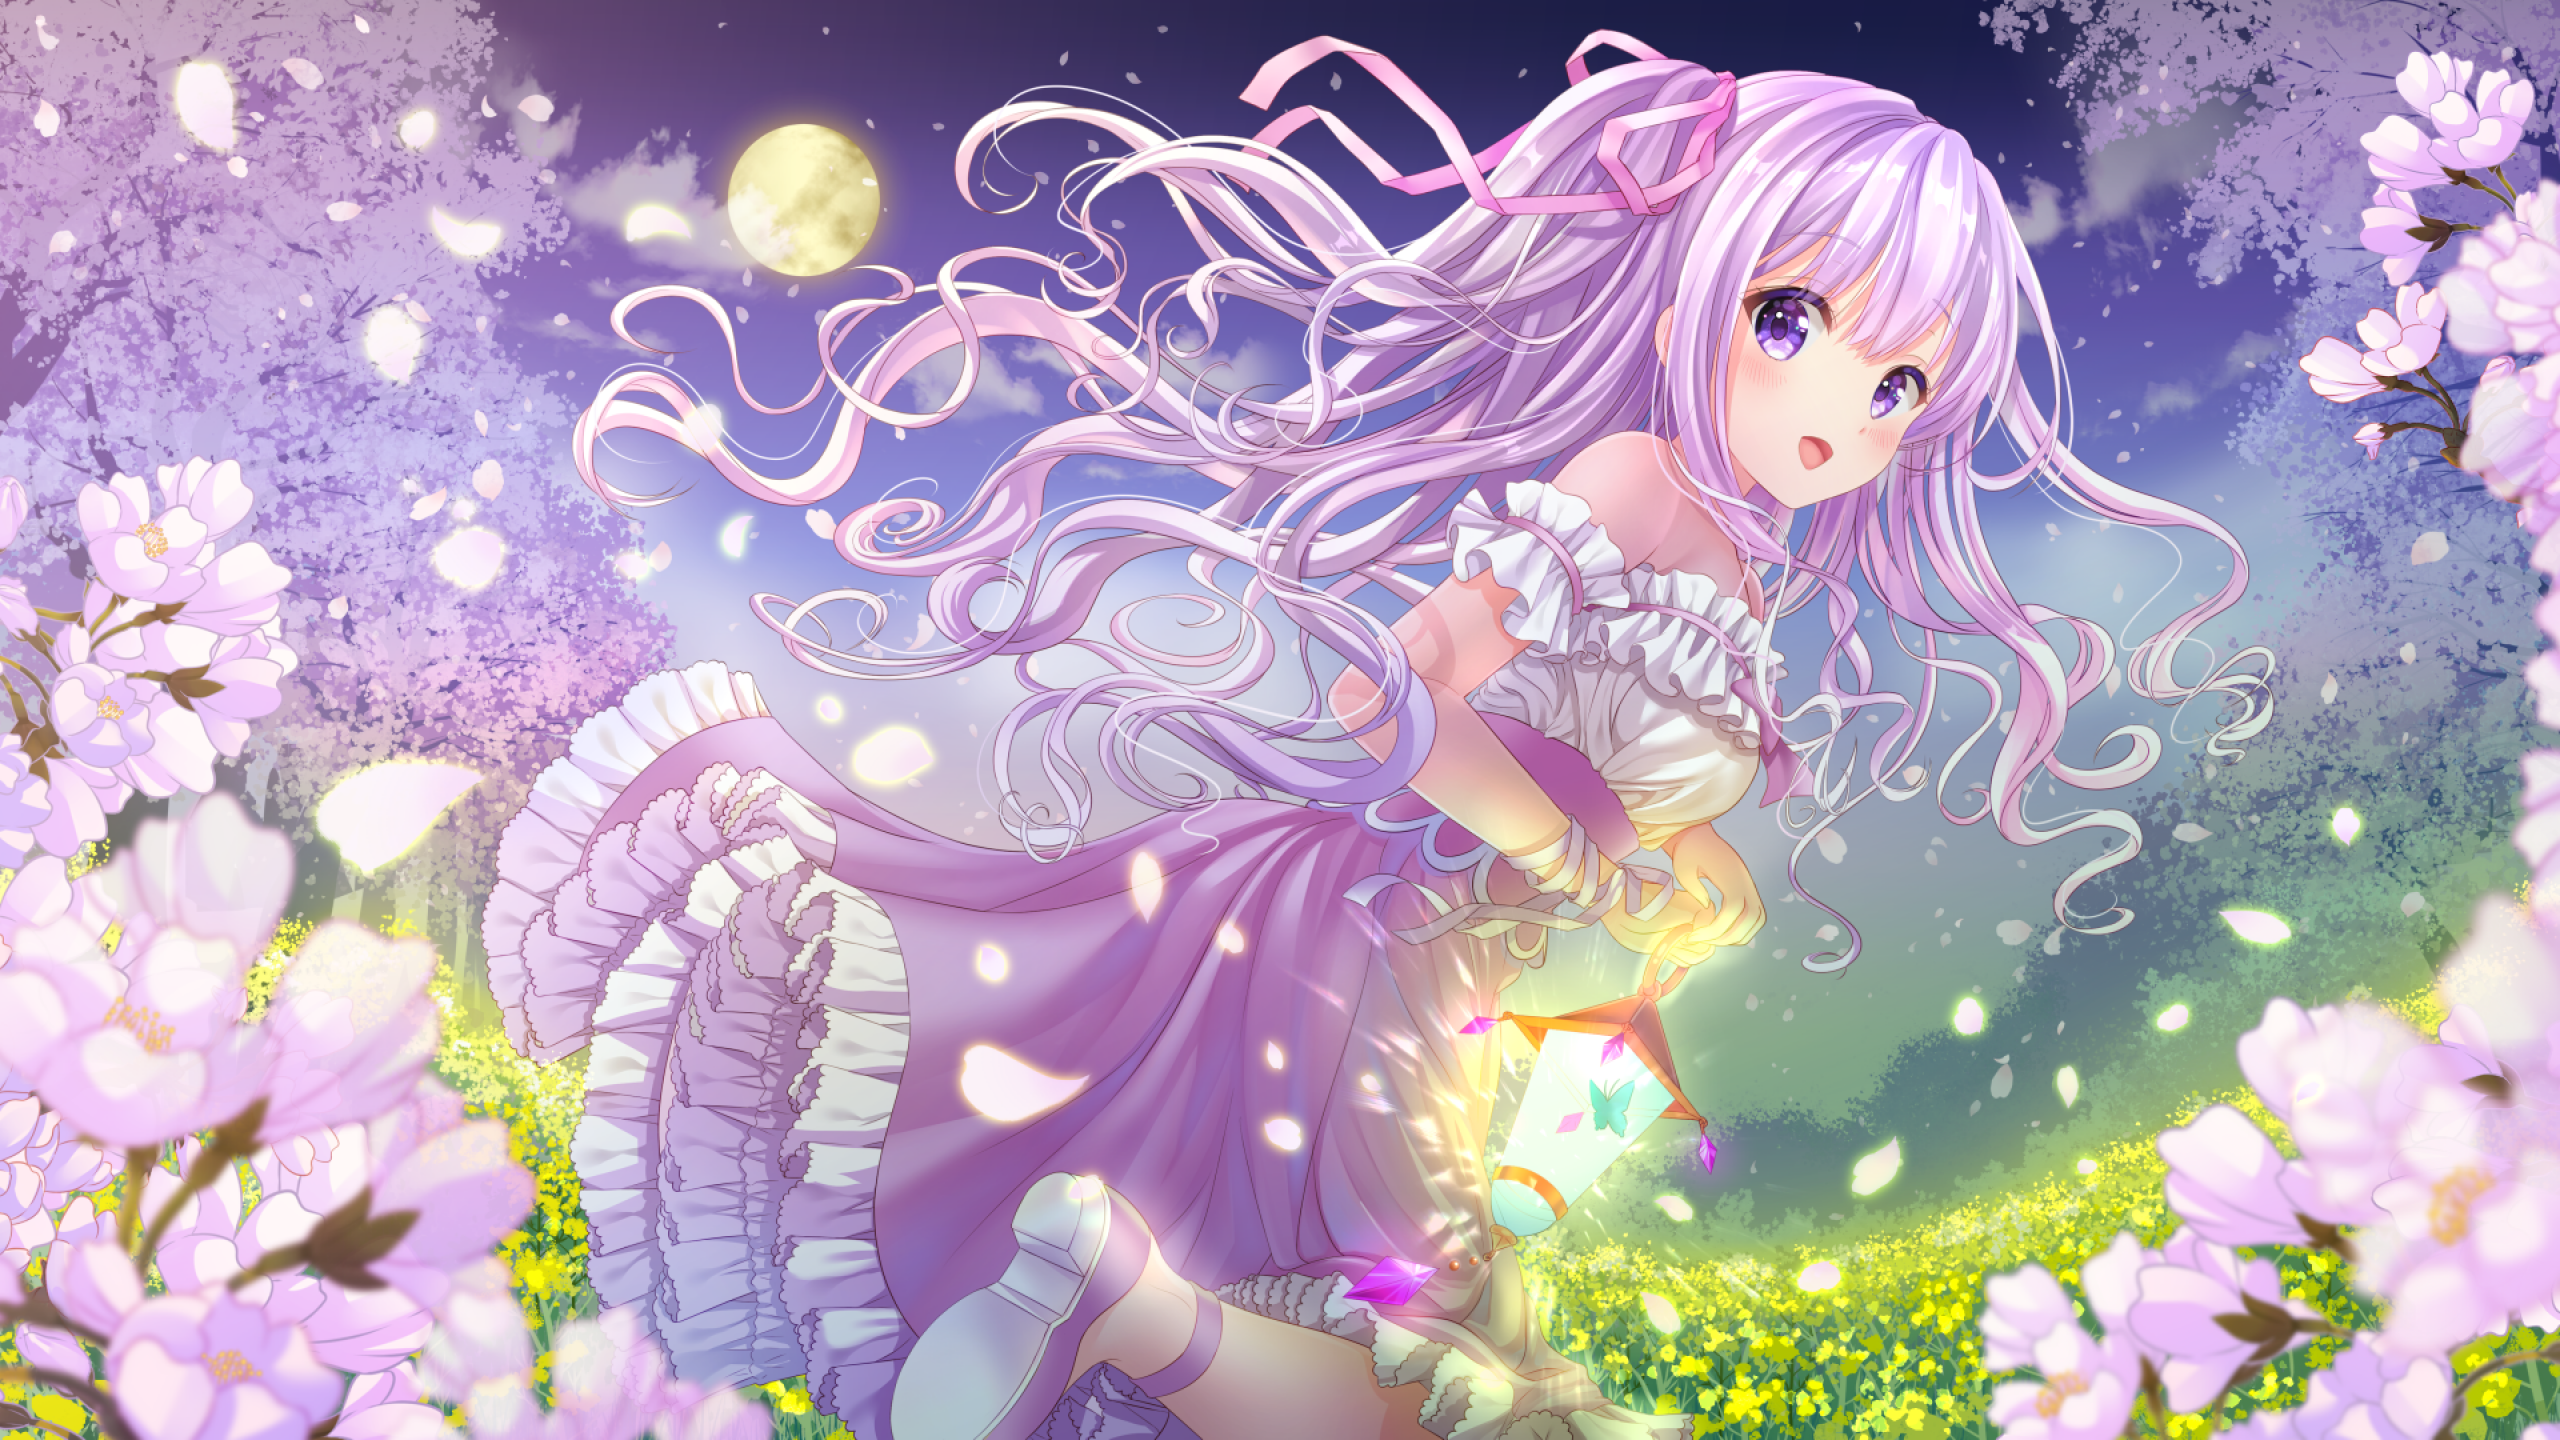 Download 2560x1440 Anime Girl, Purple Hair, Moon, Petals, Blossom, Dress, Smiling Wallpaper for iMac 27 inch